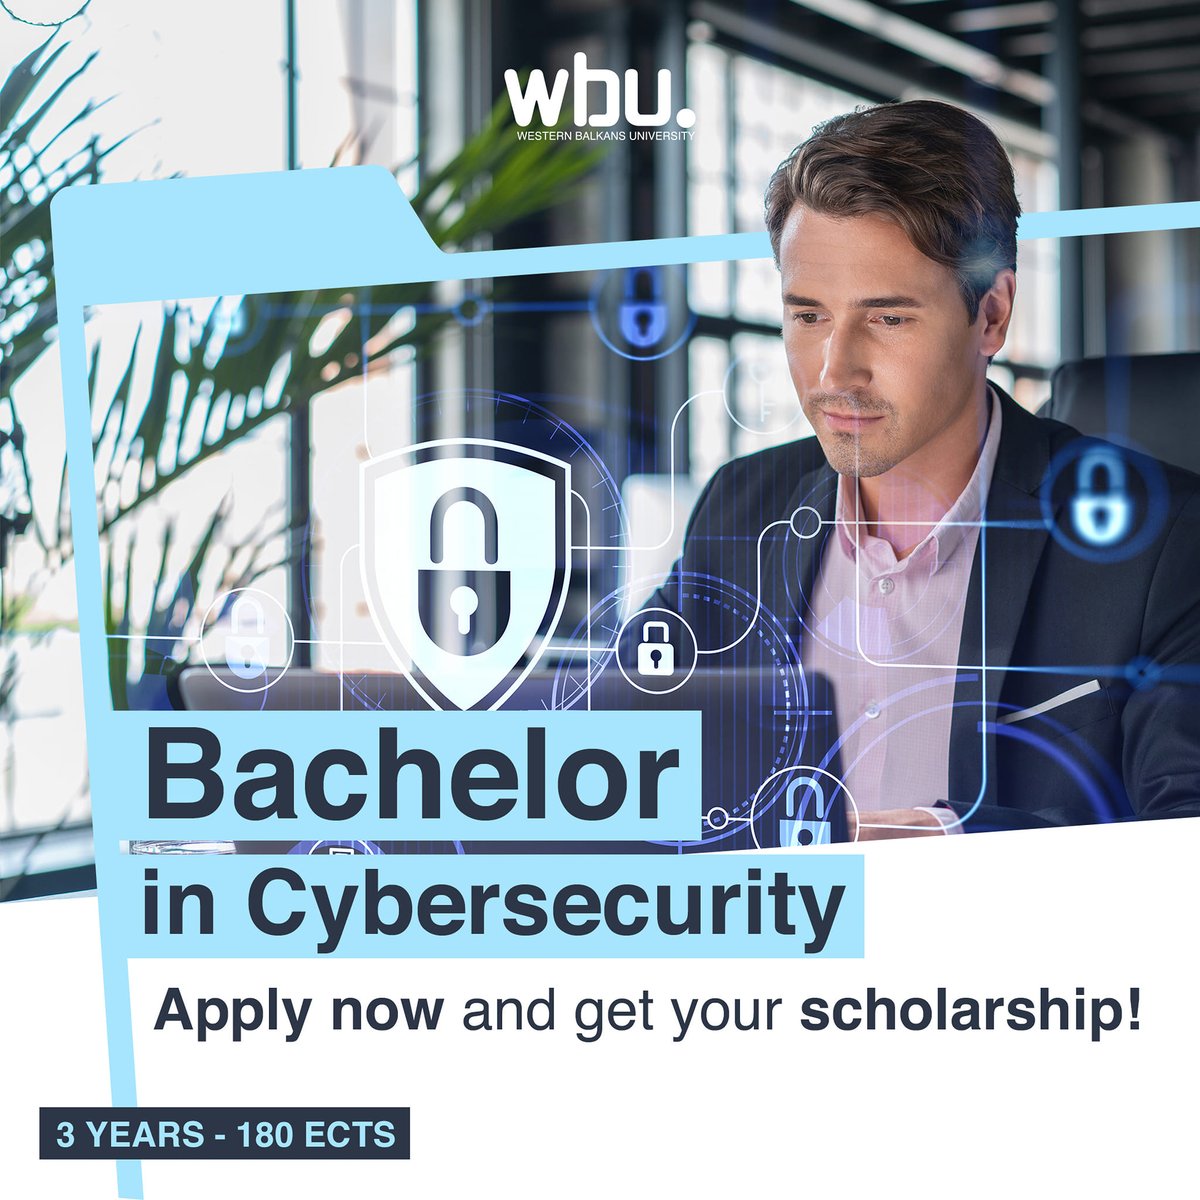 👉 Bachelor in #Cybersecurity at #WBU with #scholarship
🌟 A three-year program, 180 ECTS

📢The curriculum of the Bachelor’s degree in Cybersecurity at #WBU includes coursework in areas such as #NetworkSecurity, #Cryptography, #ComputerForensics, #RiskManagement, and #CyberLaw.